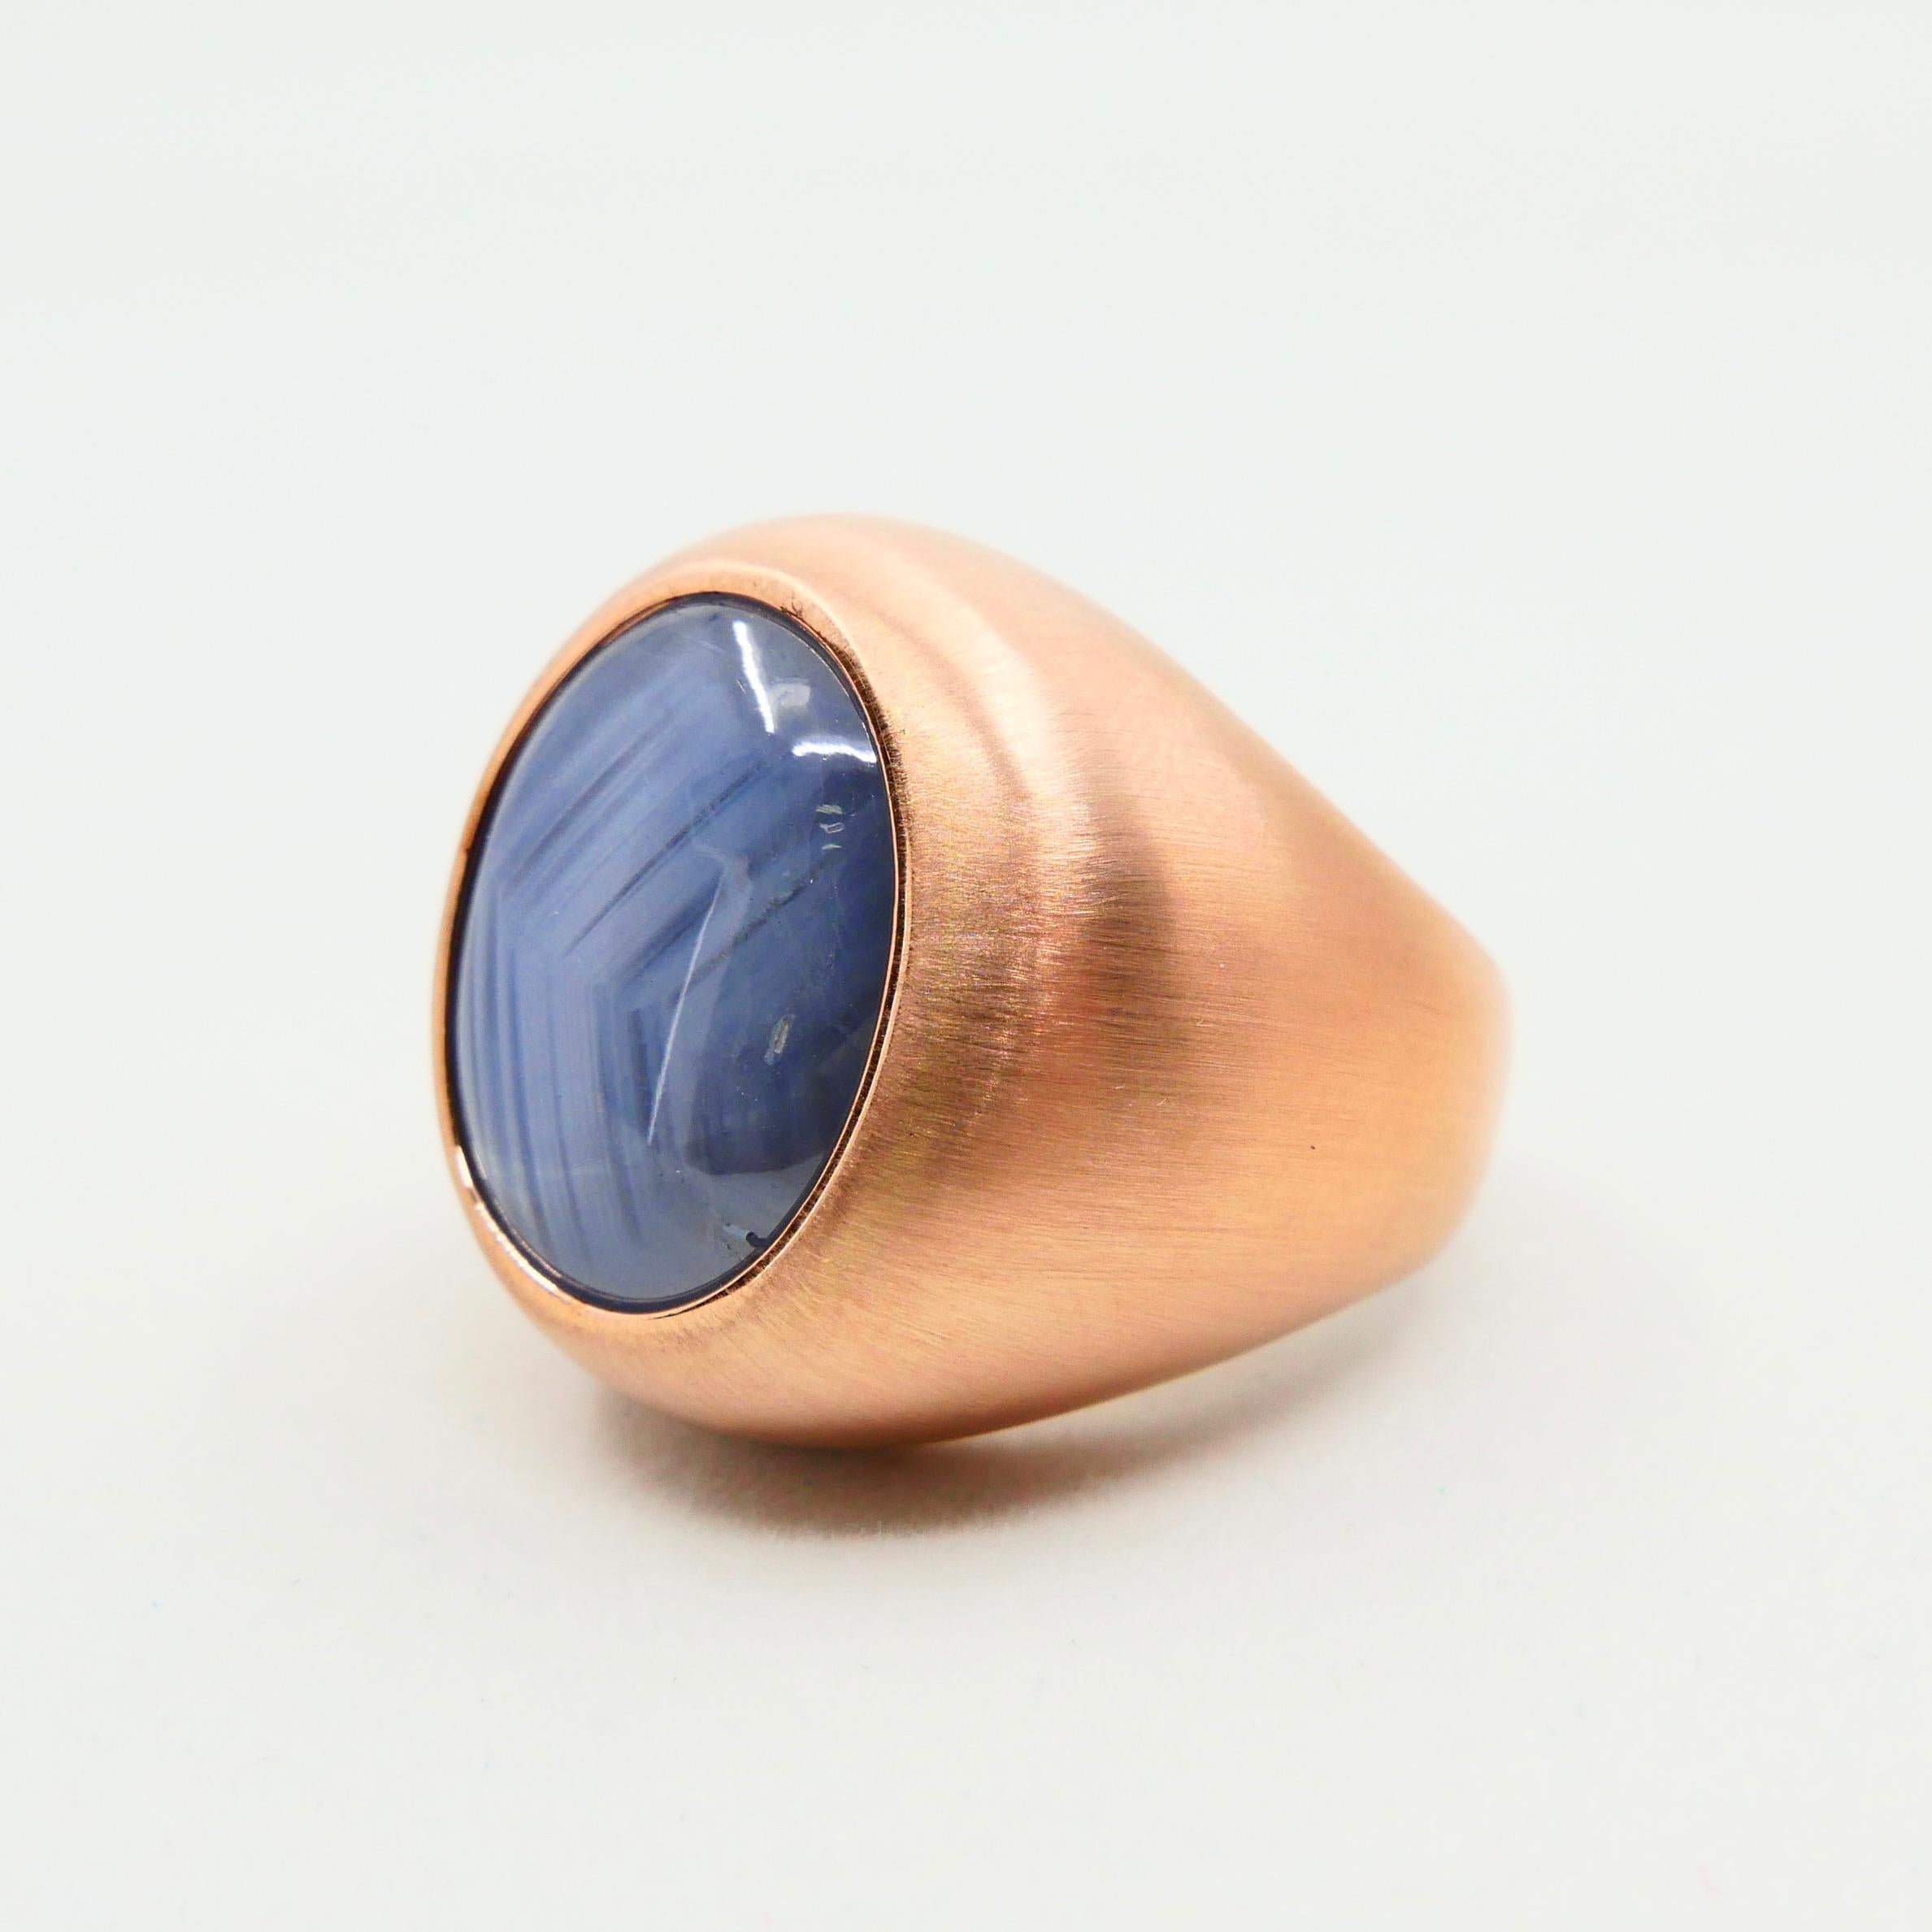 Certified Blue Star Sapphire 39.28 Carat Rose Gold Ring, Unisex, Strong Star 2